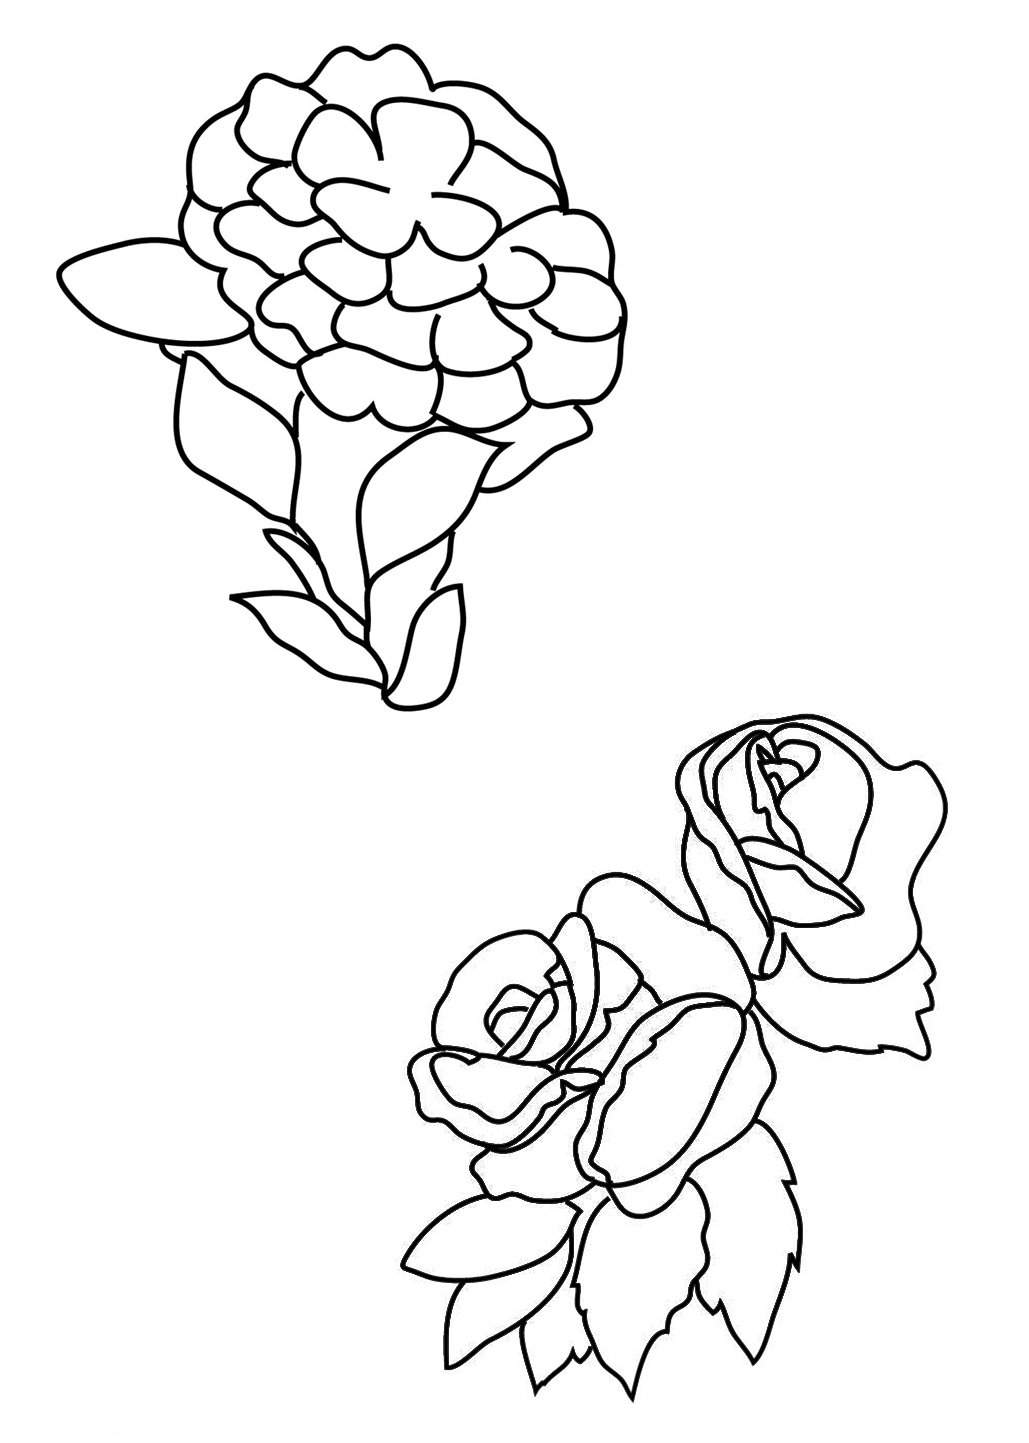 Roses And Hearts Coloring Pages Growth Coloring Pages Of Rose Flower